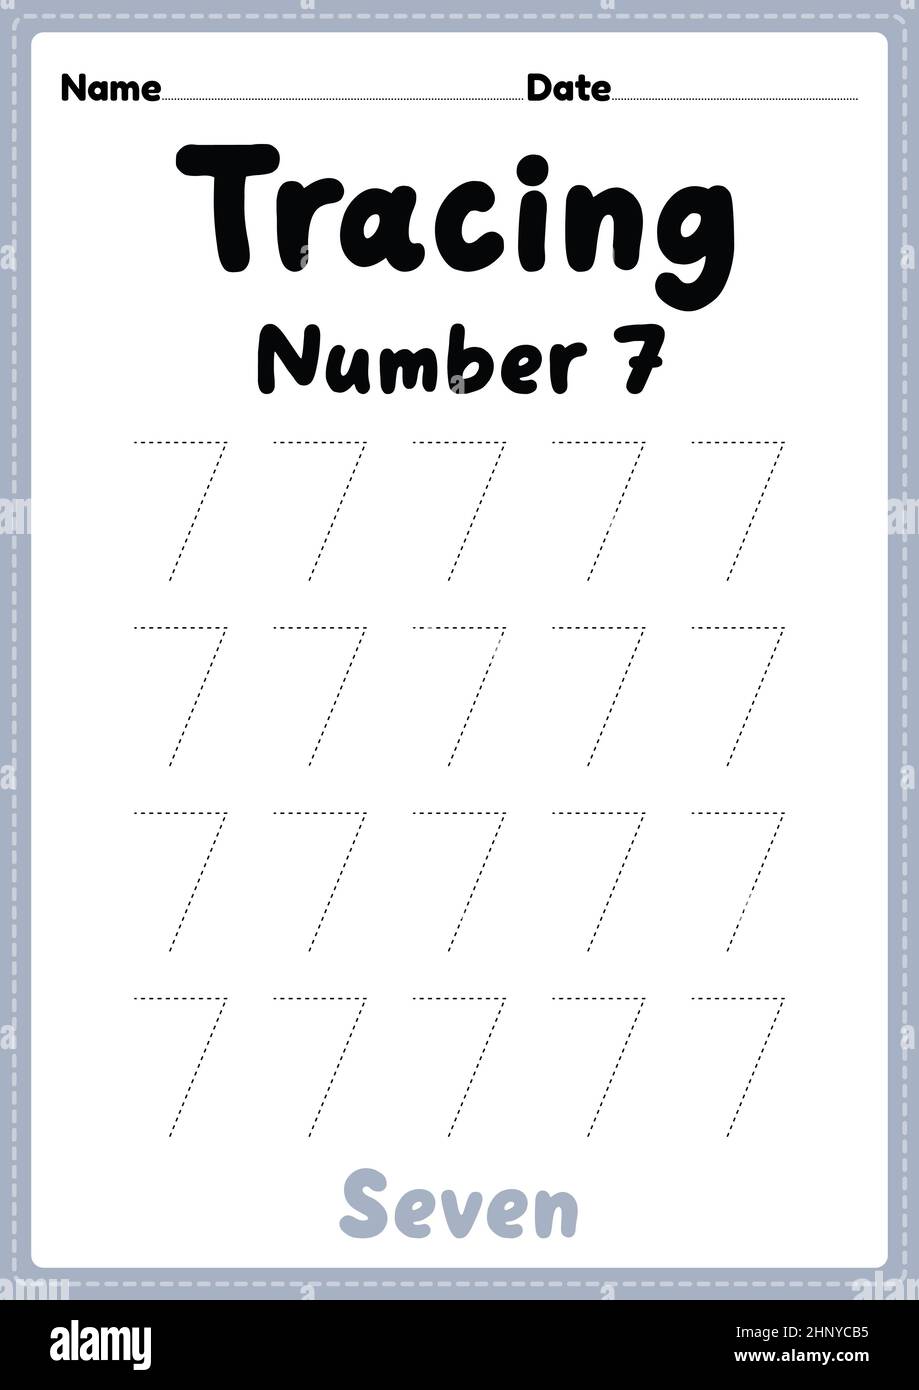 Tracing number 7 worksheet for kindergarten, preschool and Montessori kids for learning numbers and handwriting practice activities. Stock Photo